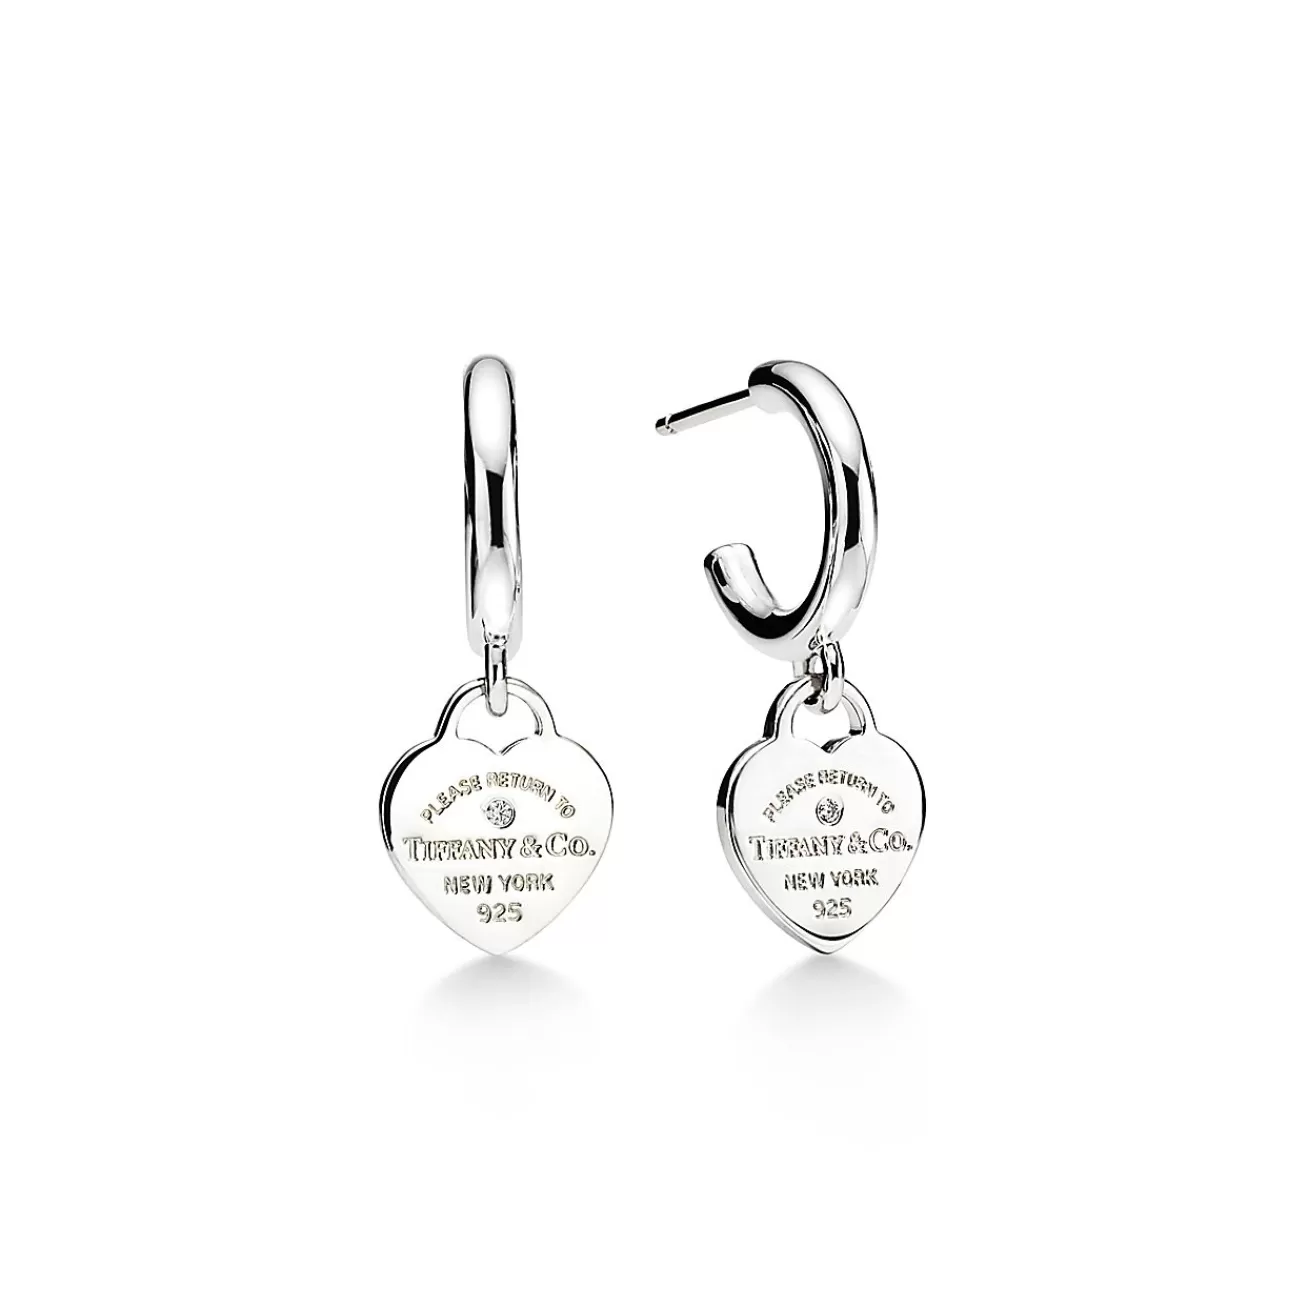 Tiffany & Co. Return to Tiffany® Hoop Earrings in Sterling Silver with Diamonds, Mini | ^ Earrings | Gifts for Her